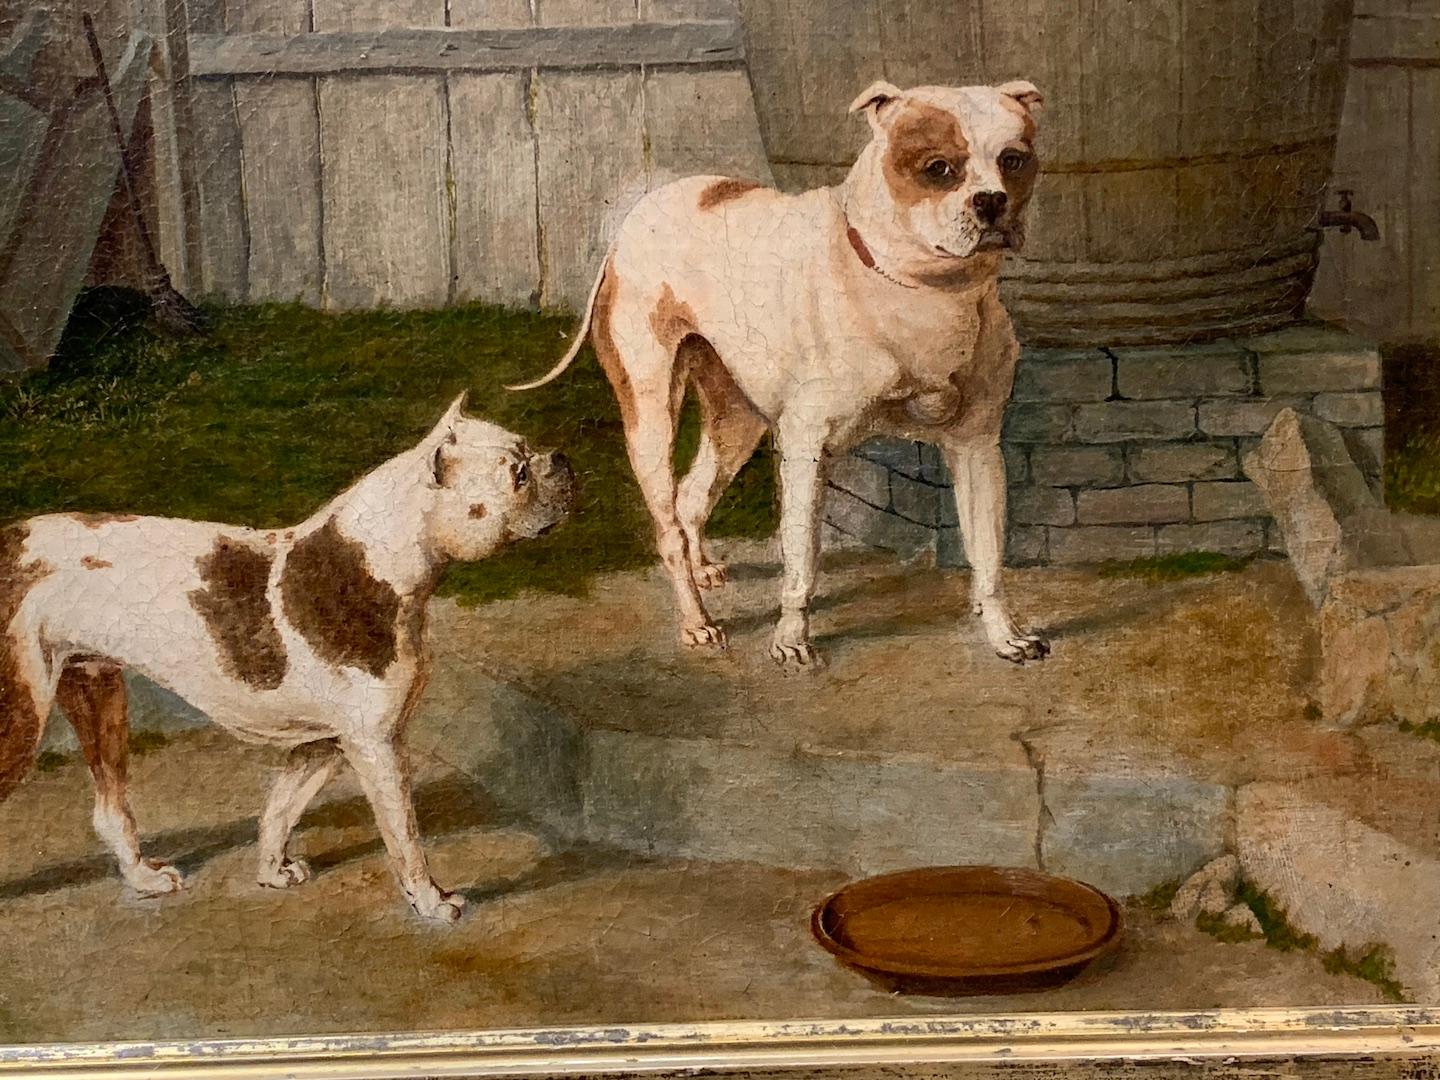 Antique 19th century English portrait two Bull Dogs in a yard. - Victorian Painting by John Frederick Herring Sr.